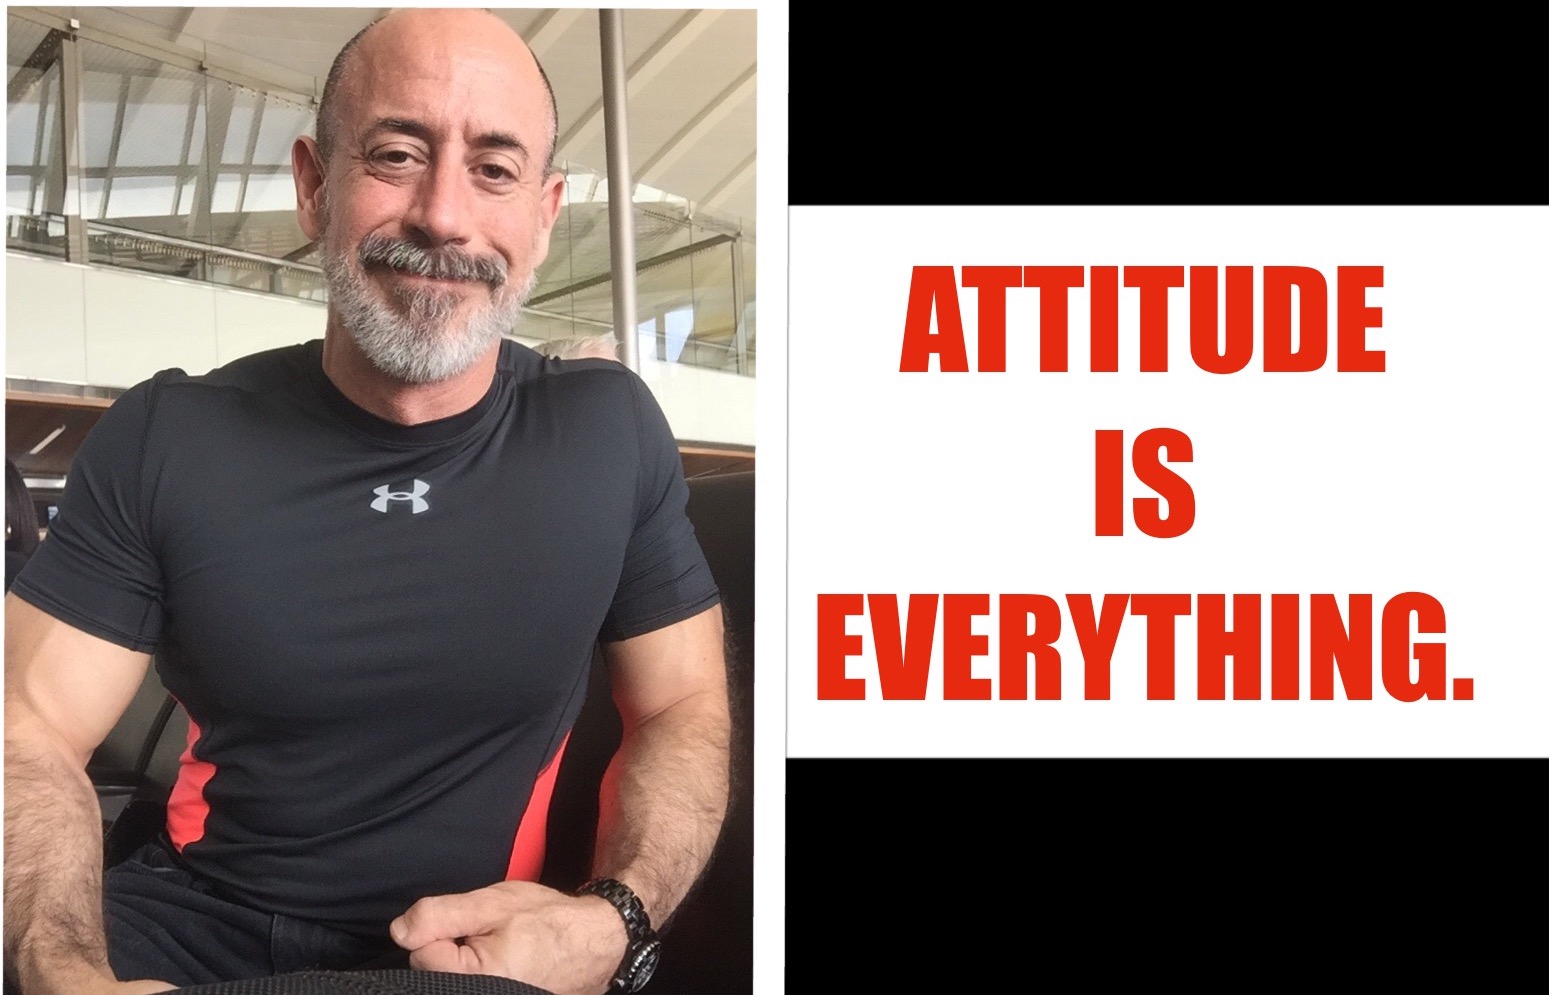 ATTITUDE IS EVERYTHING!